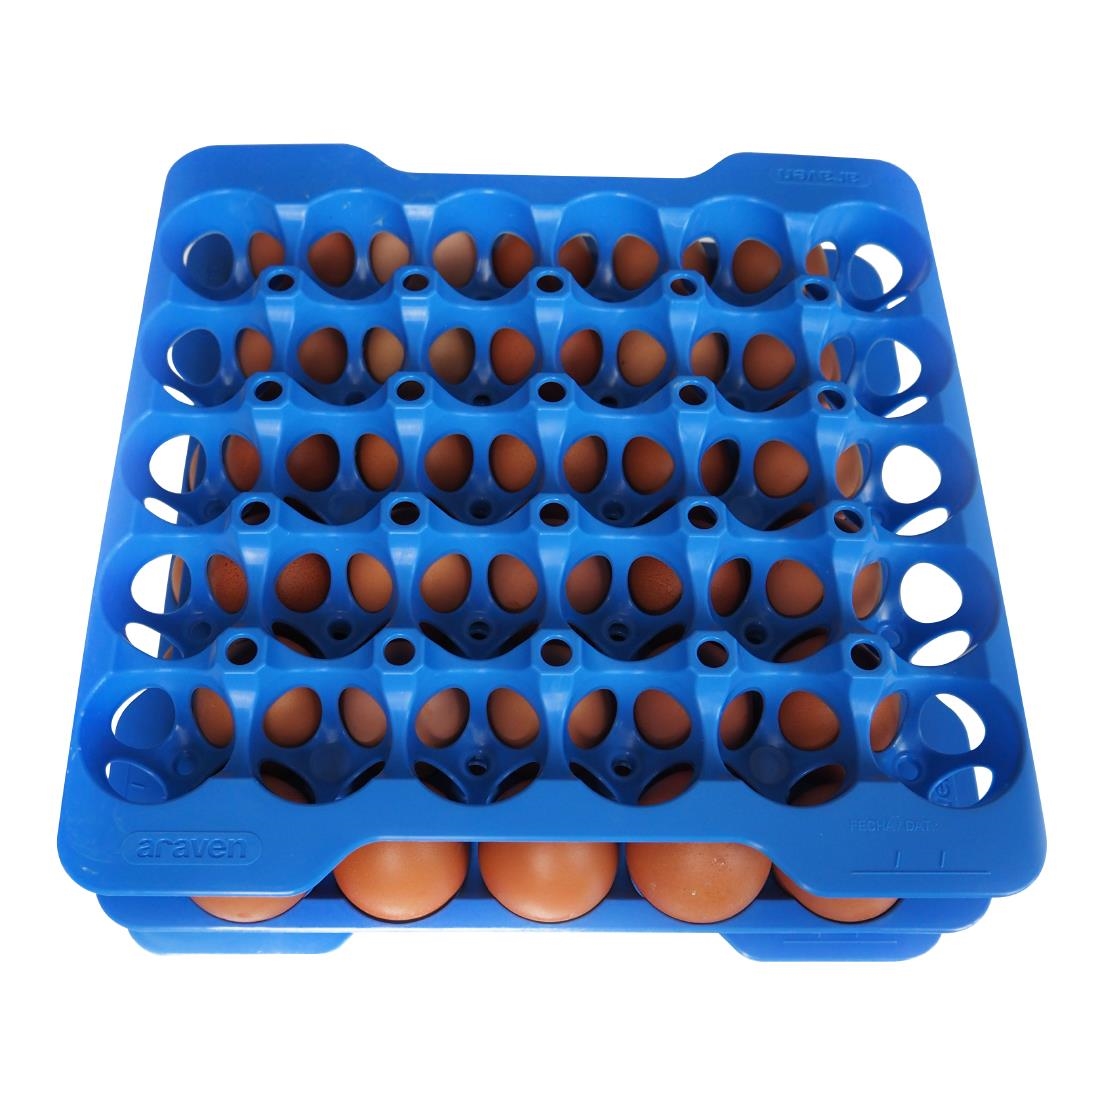 Araven Egg Storage Tray GN 2-3 Pack of 4 (DP208)